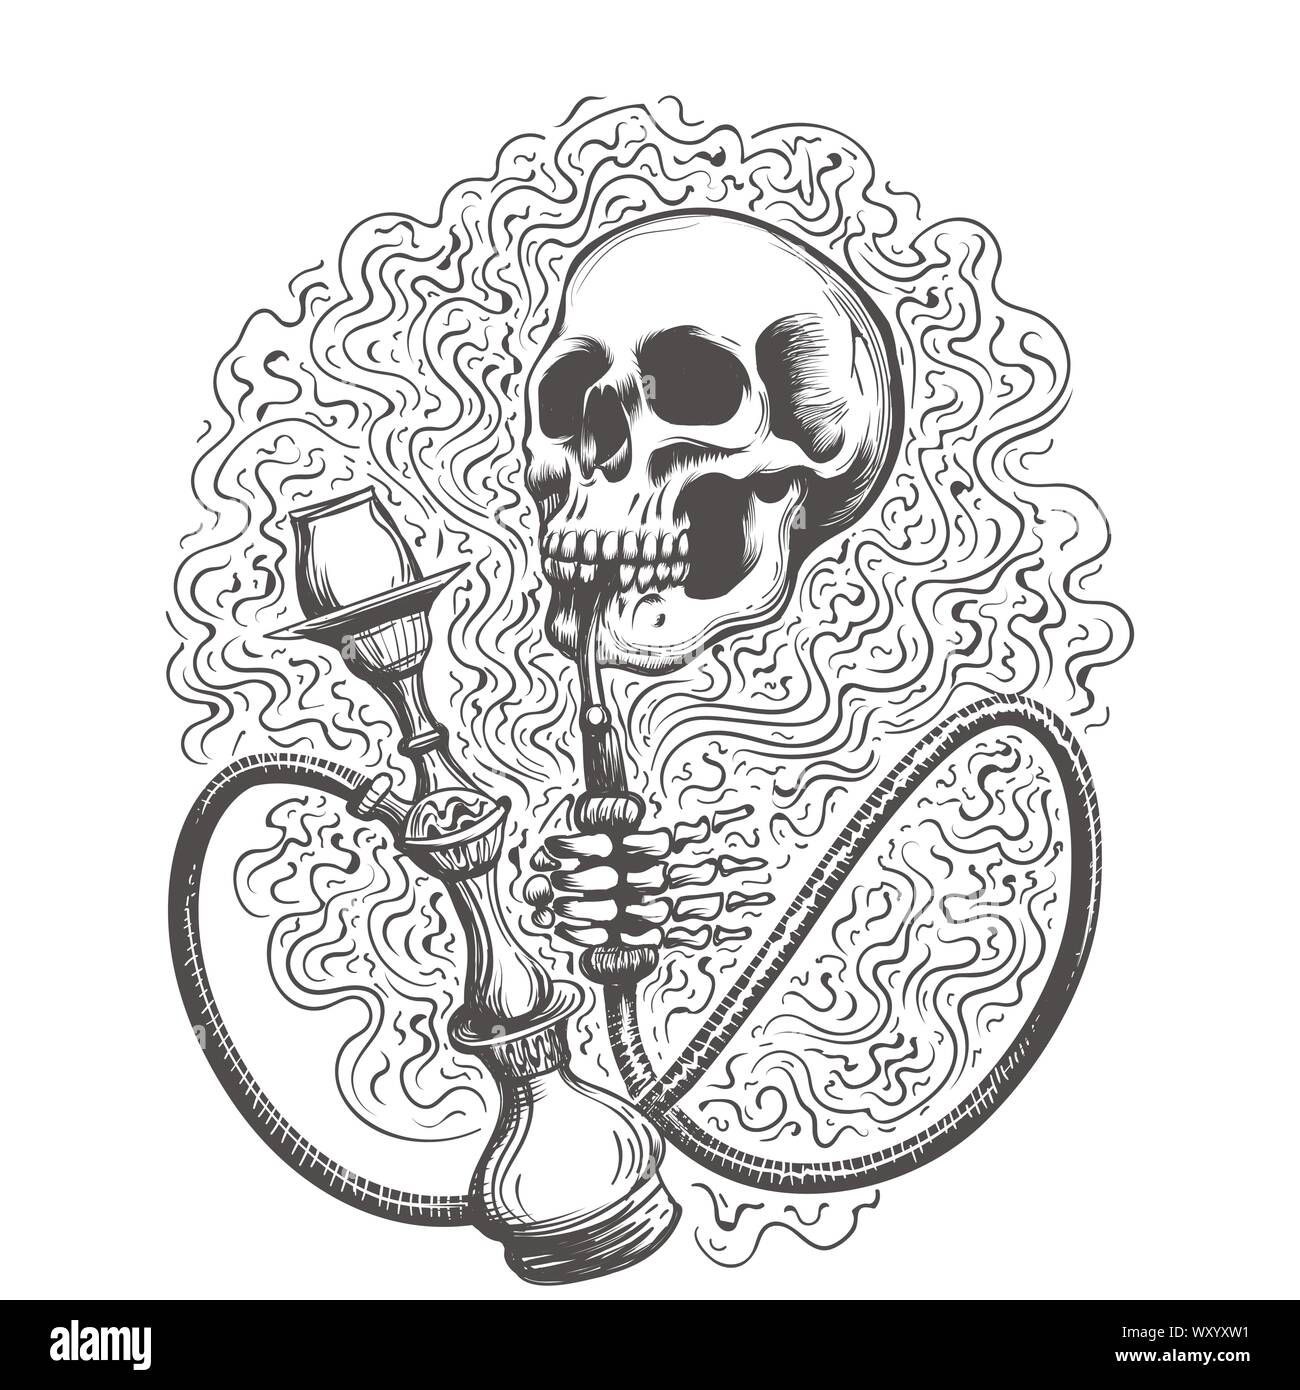 Skull with hookah in a smoke clouds drawn in tattoo style. Vector illustration. Stock Vector